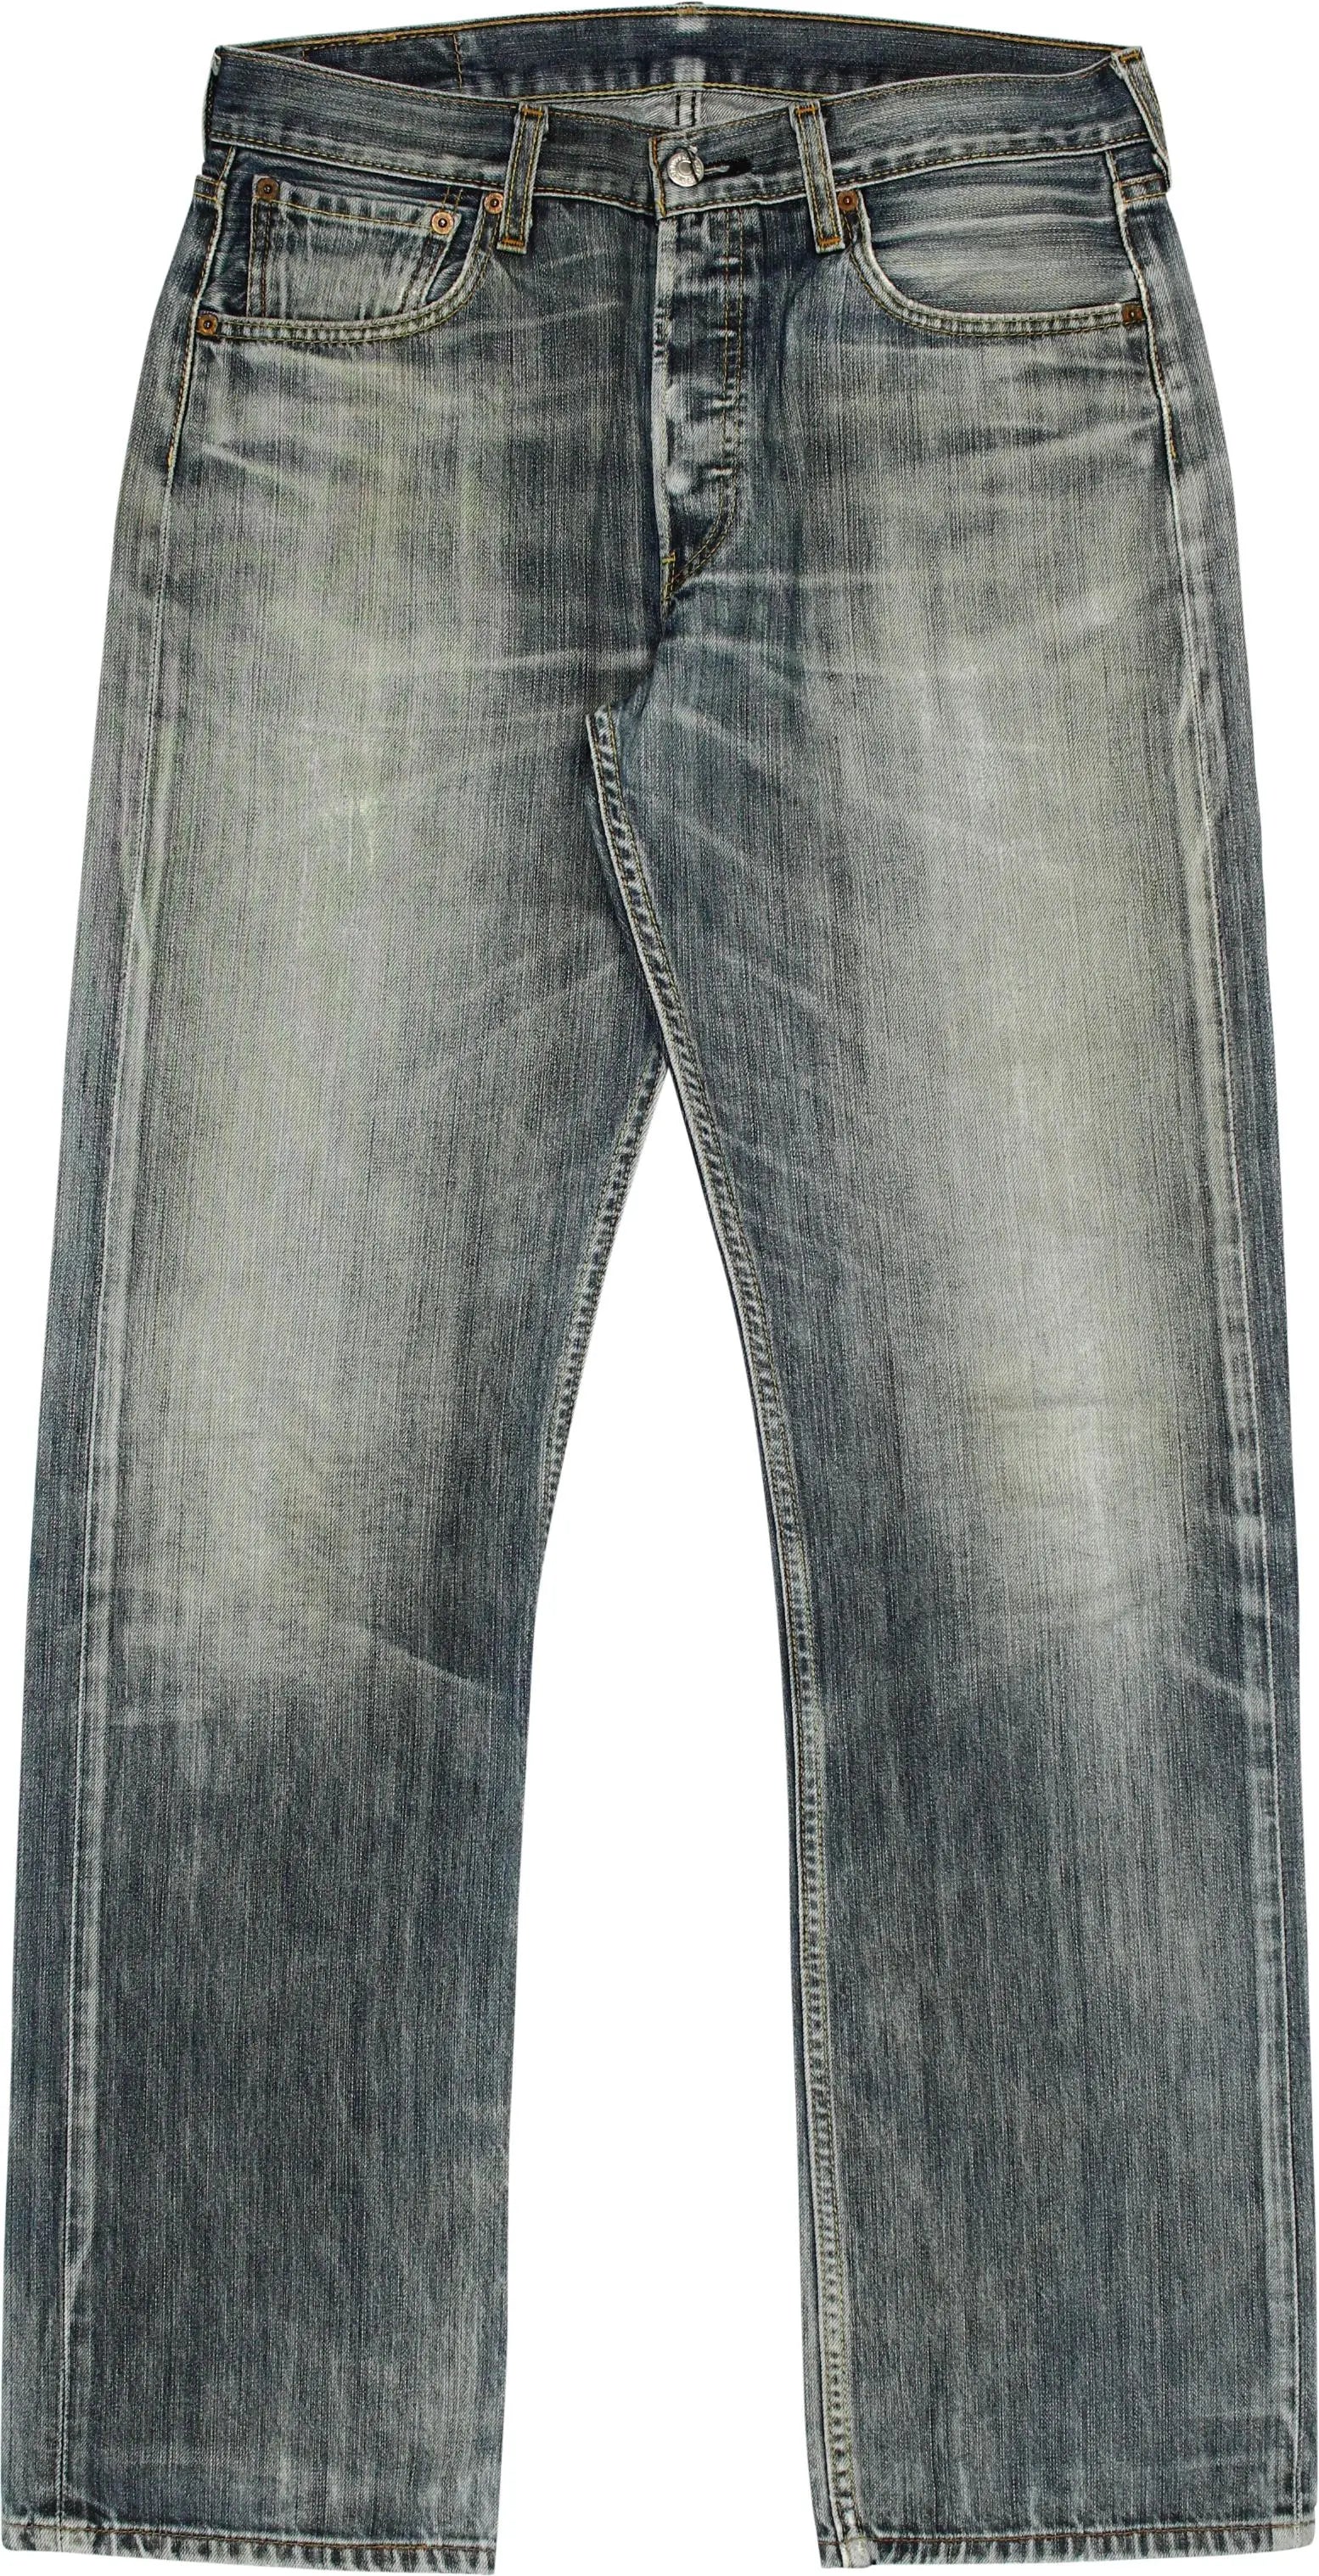 Levi's - Levi's 501 Regular Fit Jeans- ThriftTale.com - Vintage and second handclothing